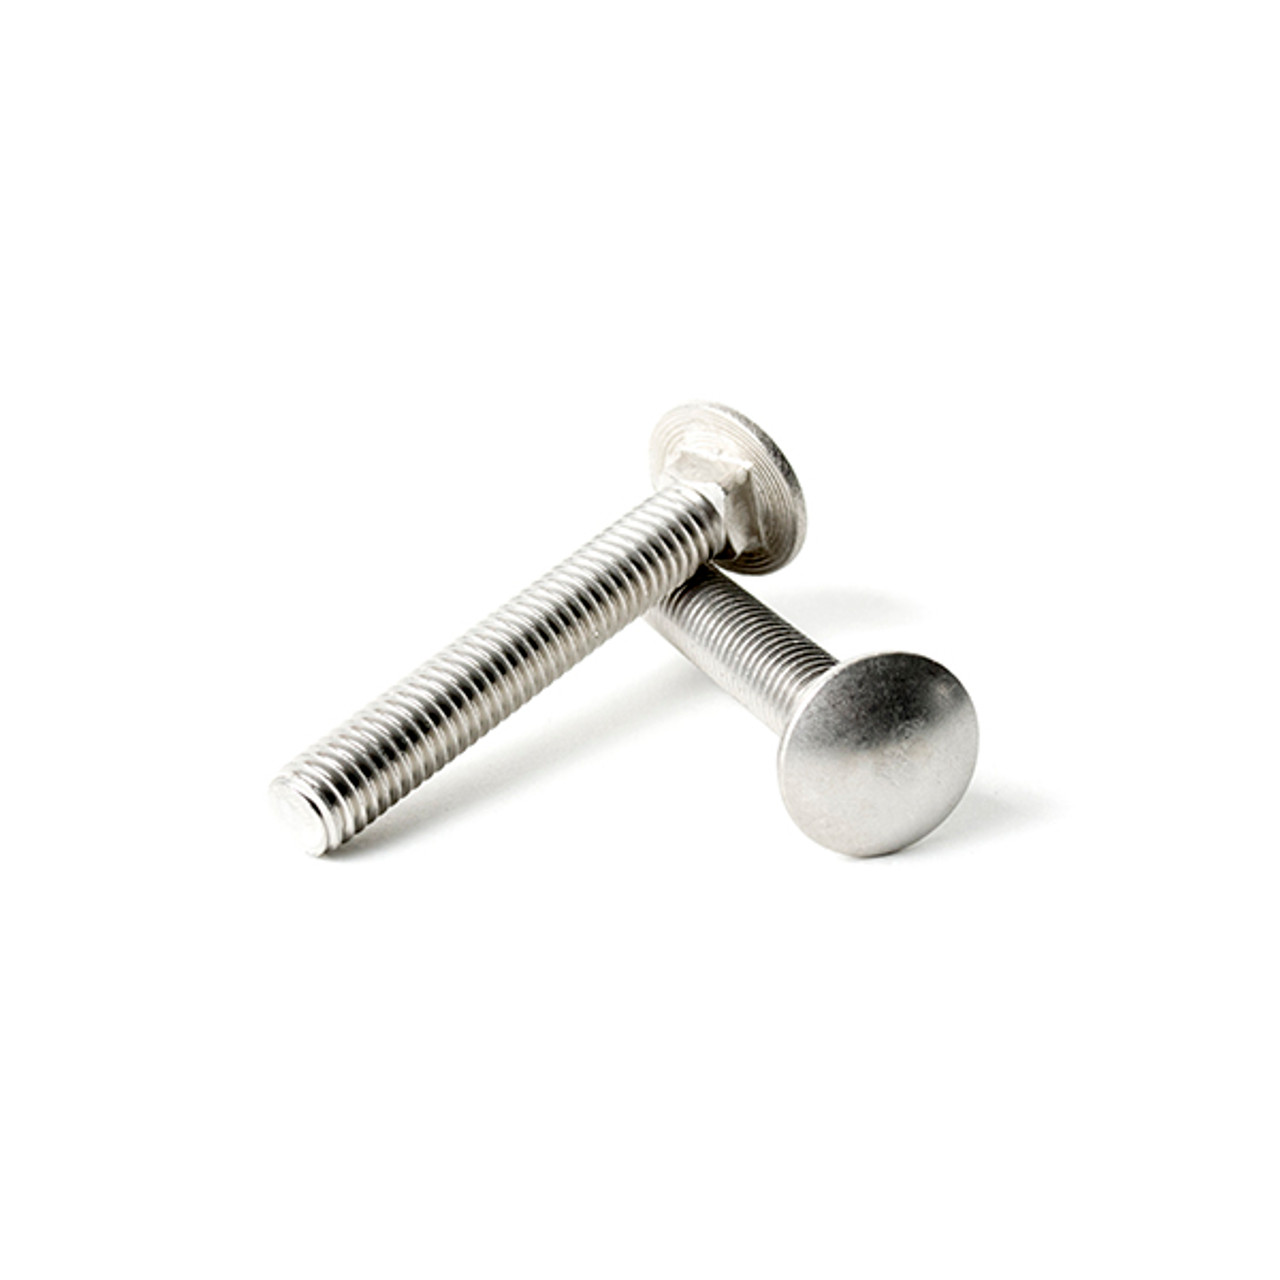 5/16 in-18 X 2-1/2 Carriage Bolt Chrome Plated Steel. 15 NLA Pack of 15 5/16-18